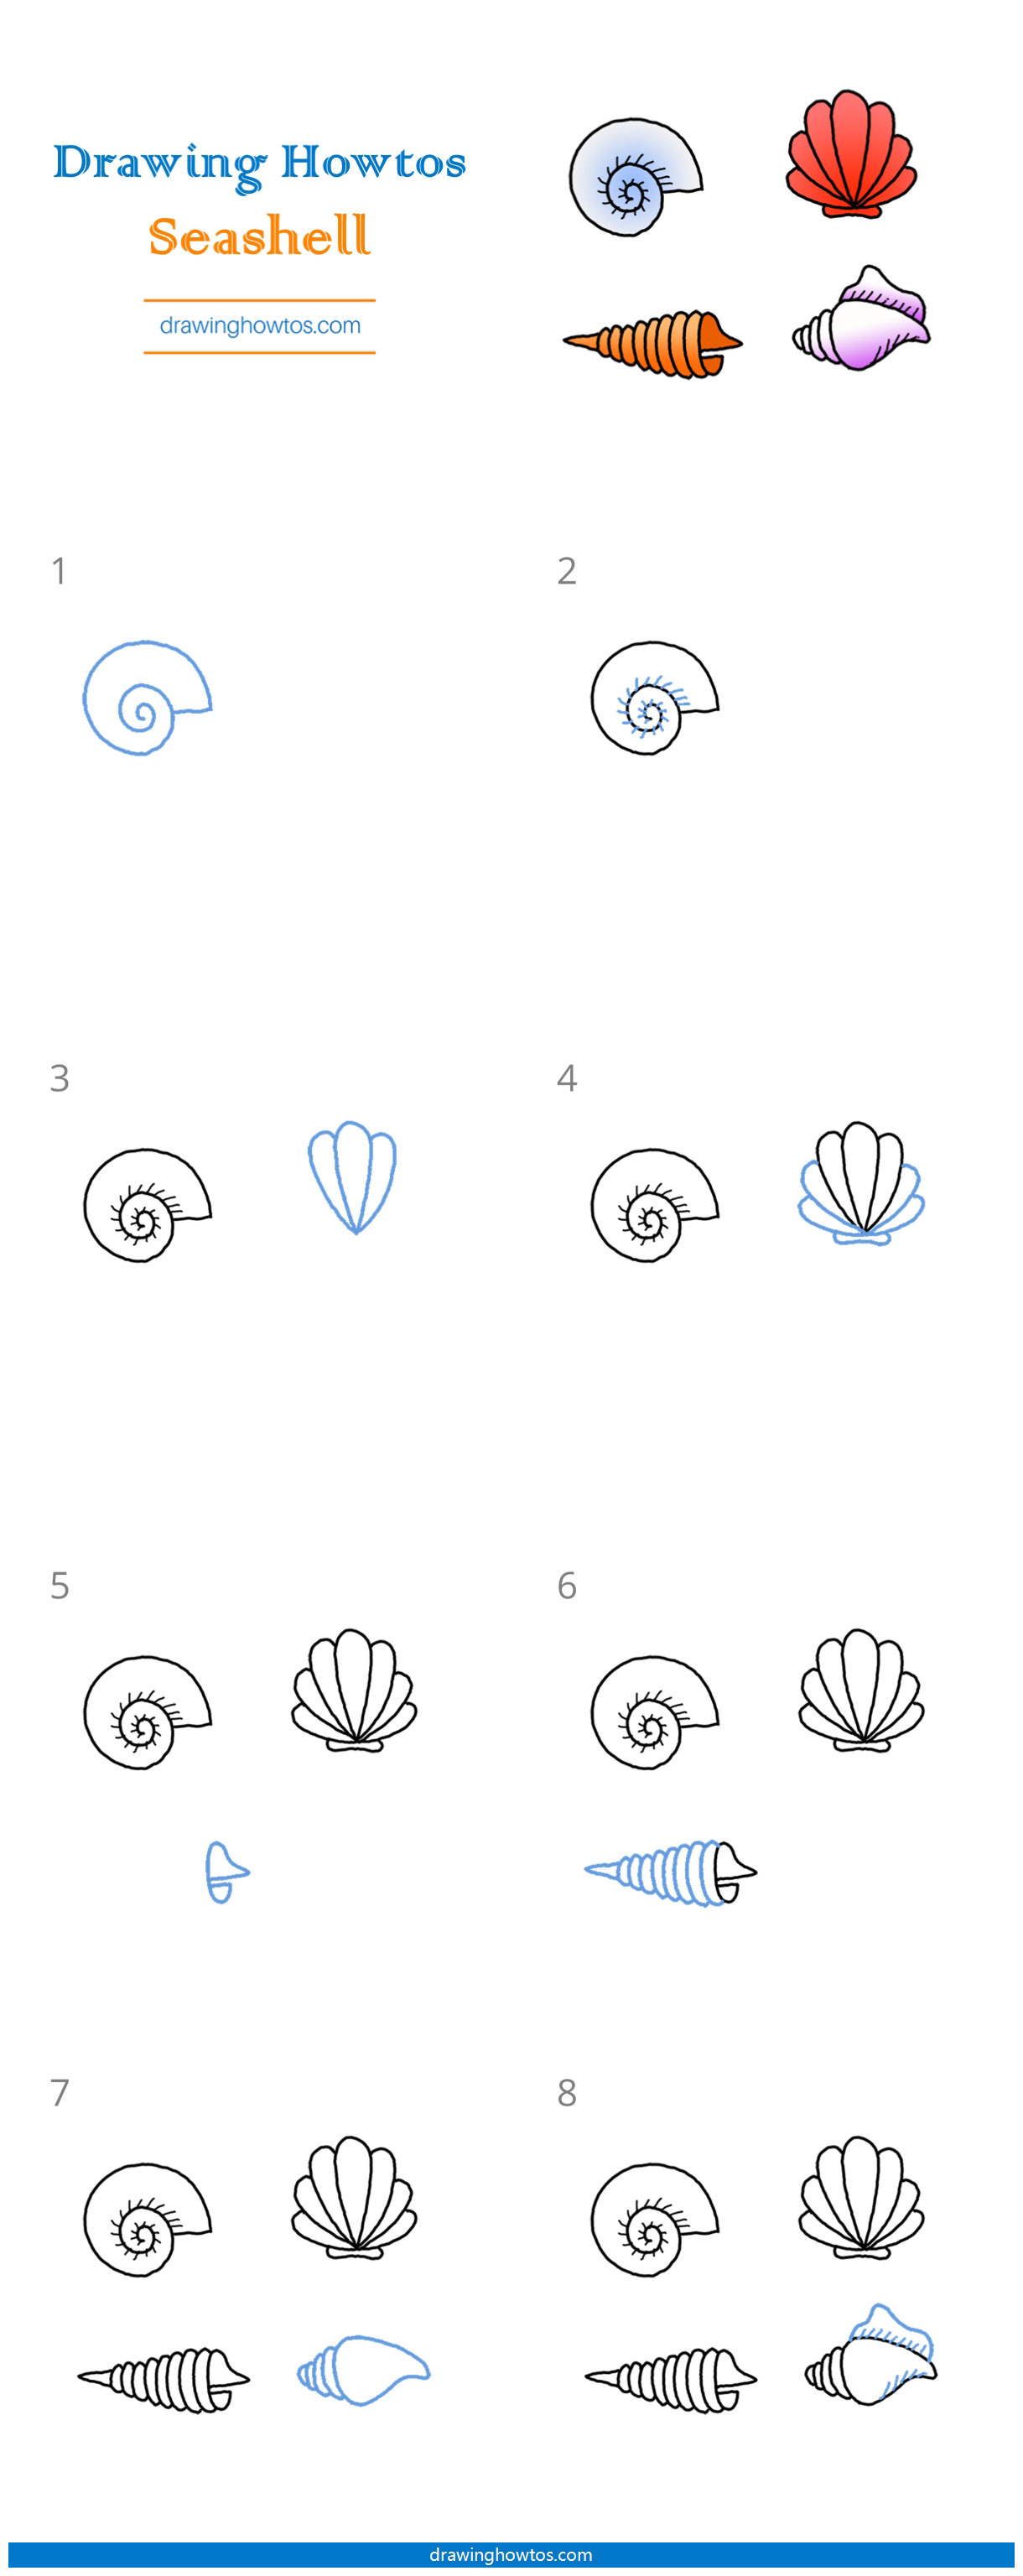 How to Draw a Seashell Step by Step